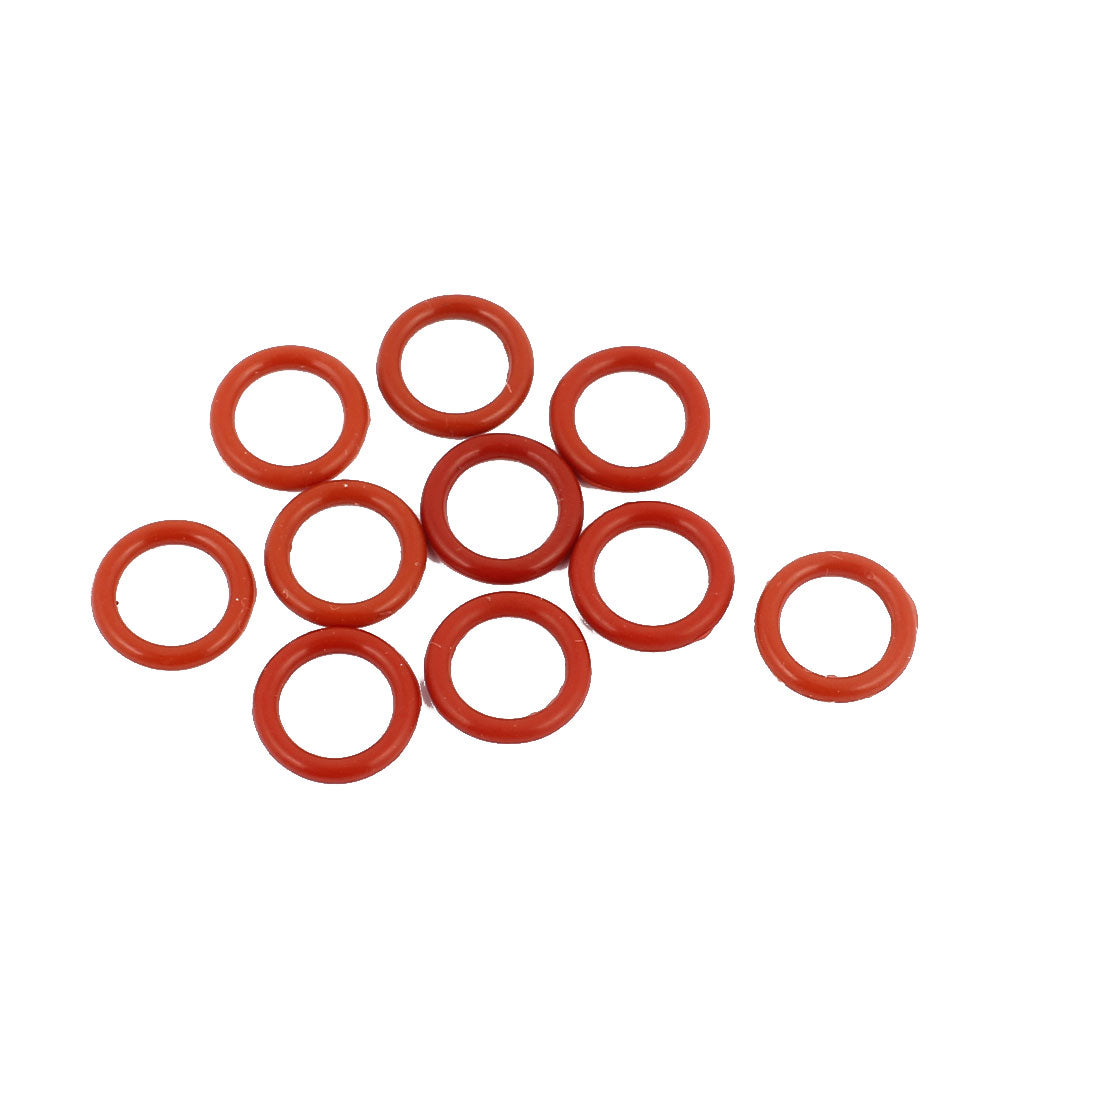 uxcell Uxcell 10pcs 12mmx1.9mm Heat Resistant Silicone O Ring Oil Sealing Ring Gasket Red